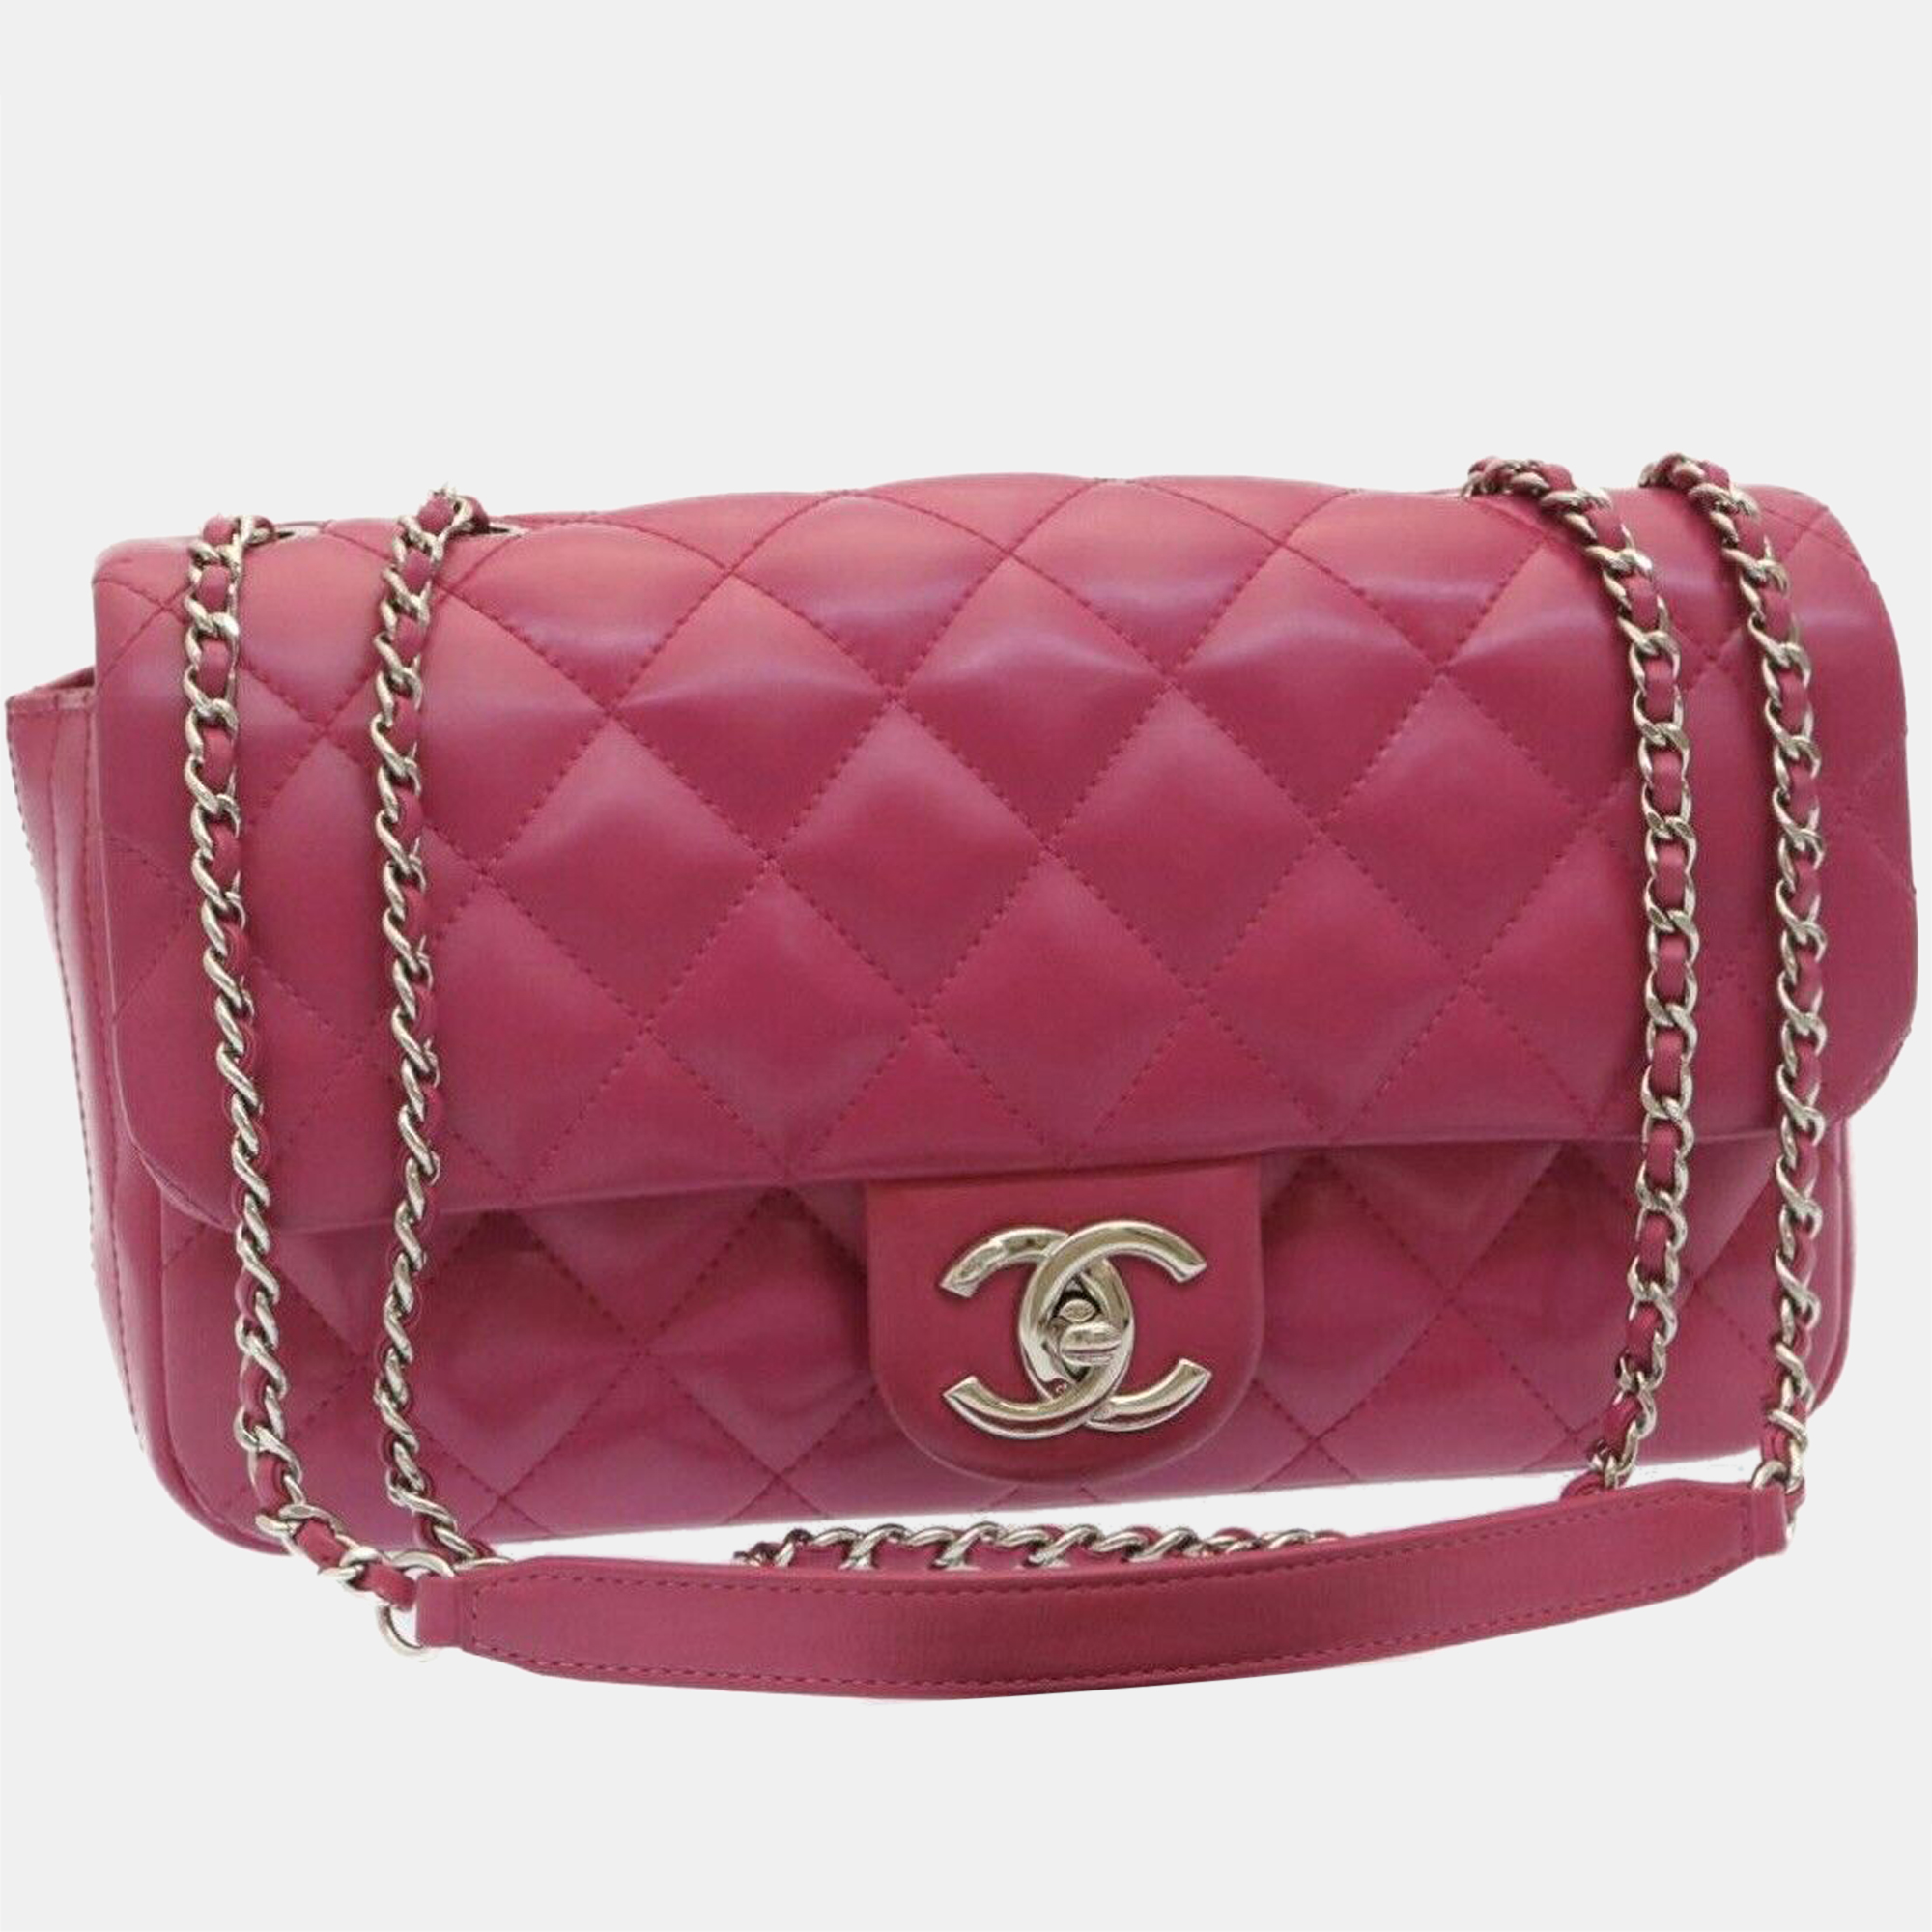 Chanel pink leather flap bag